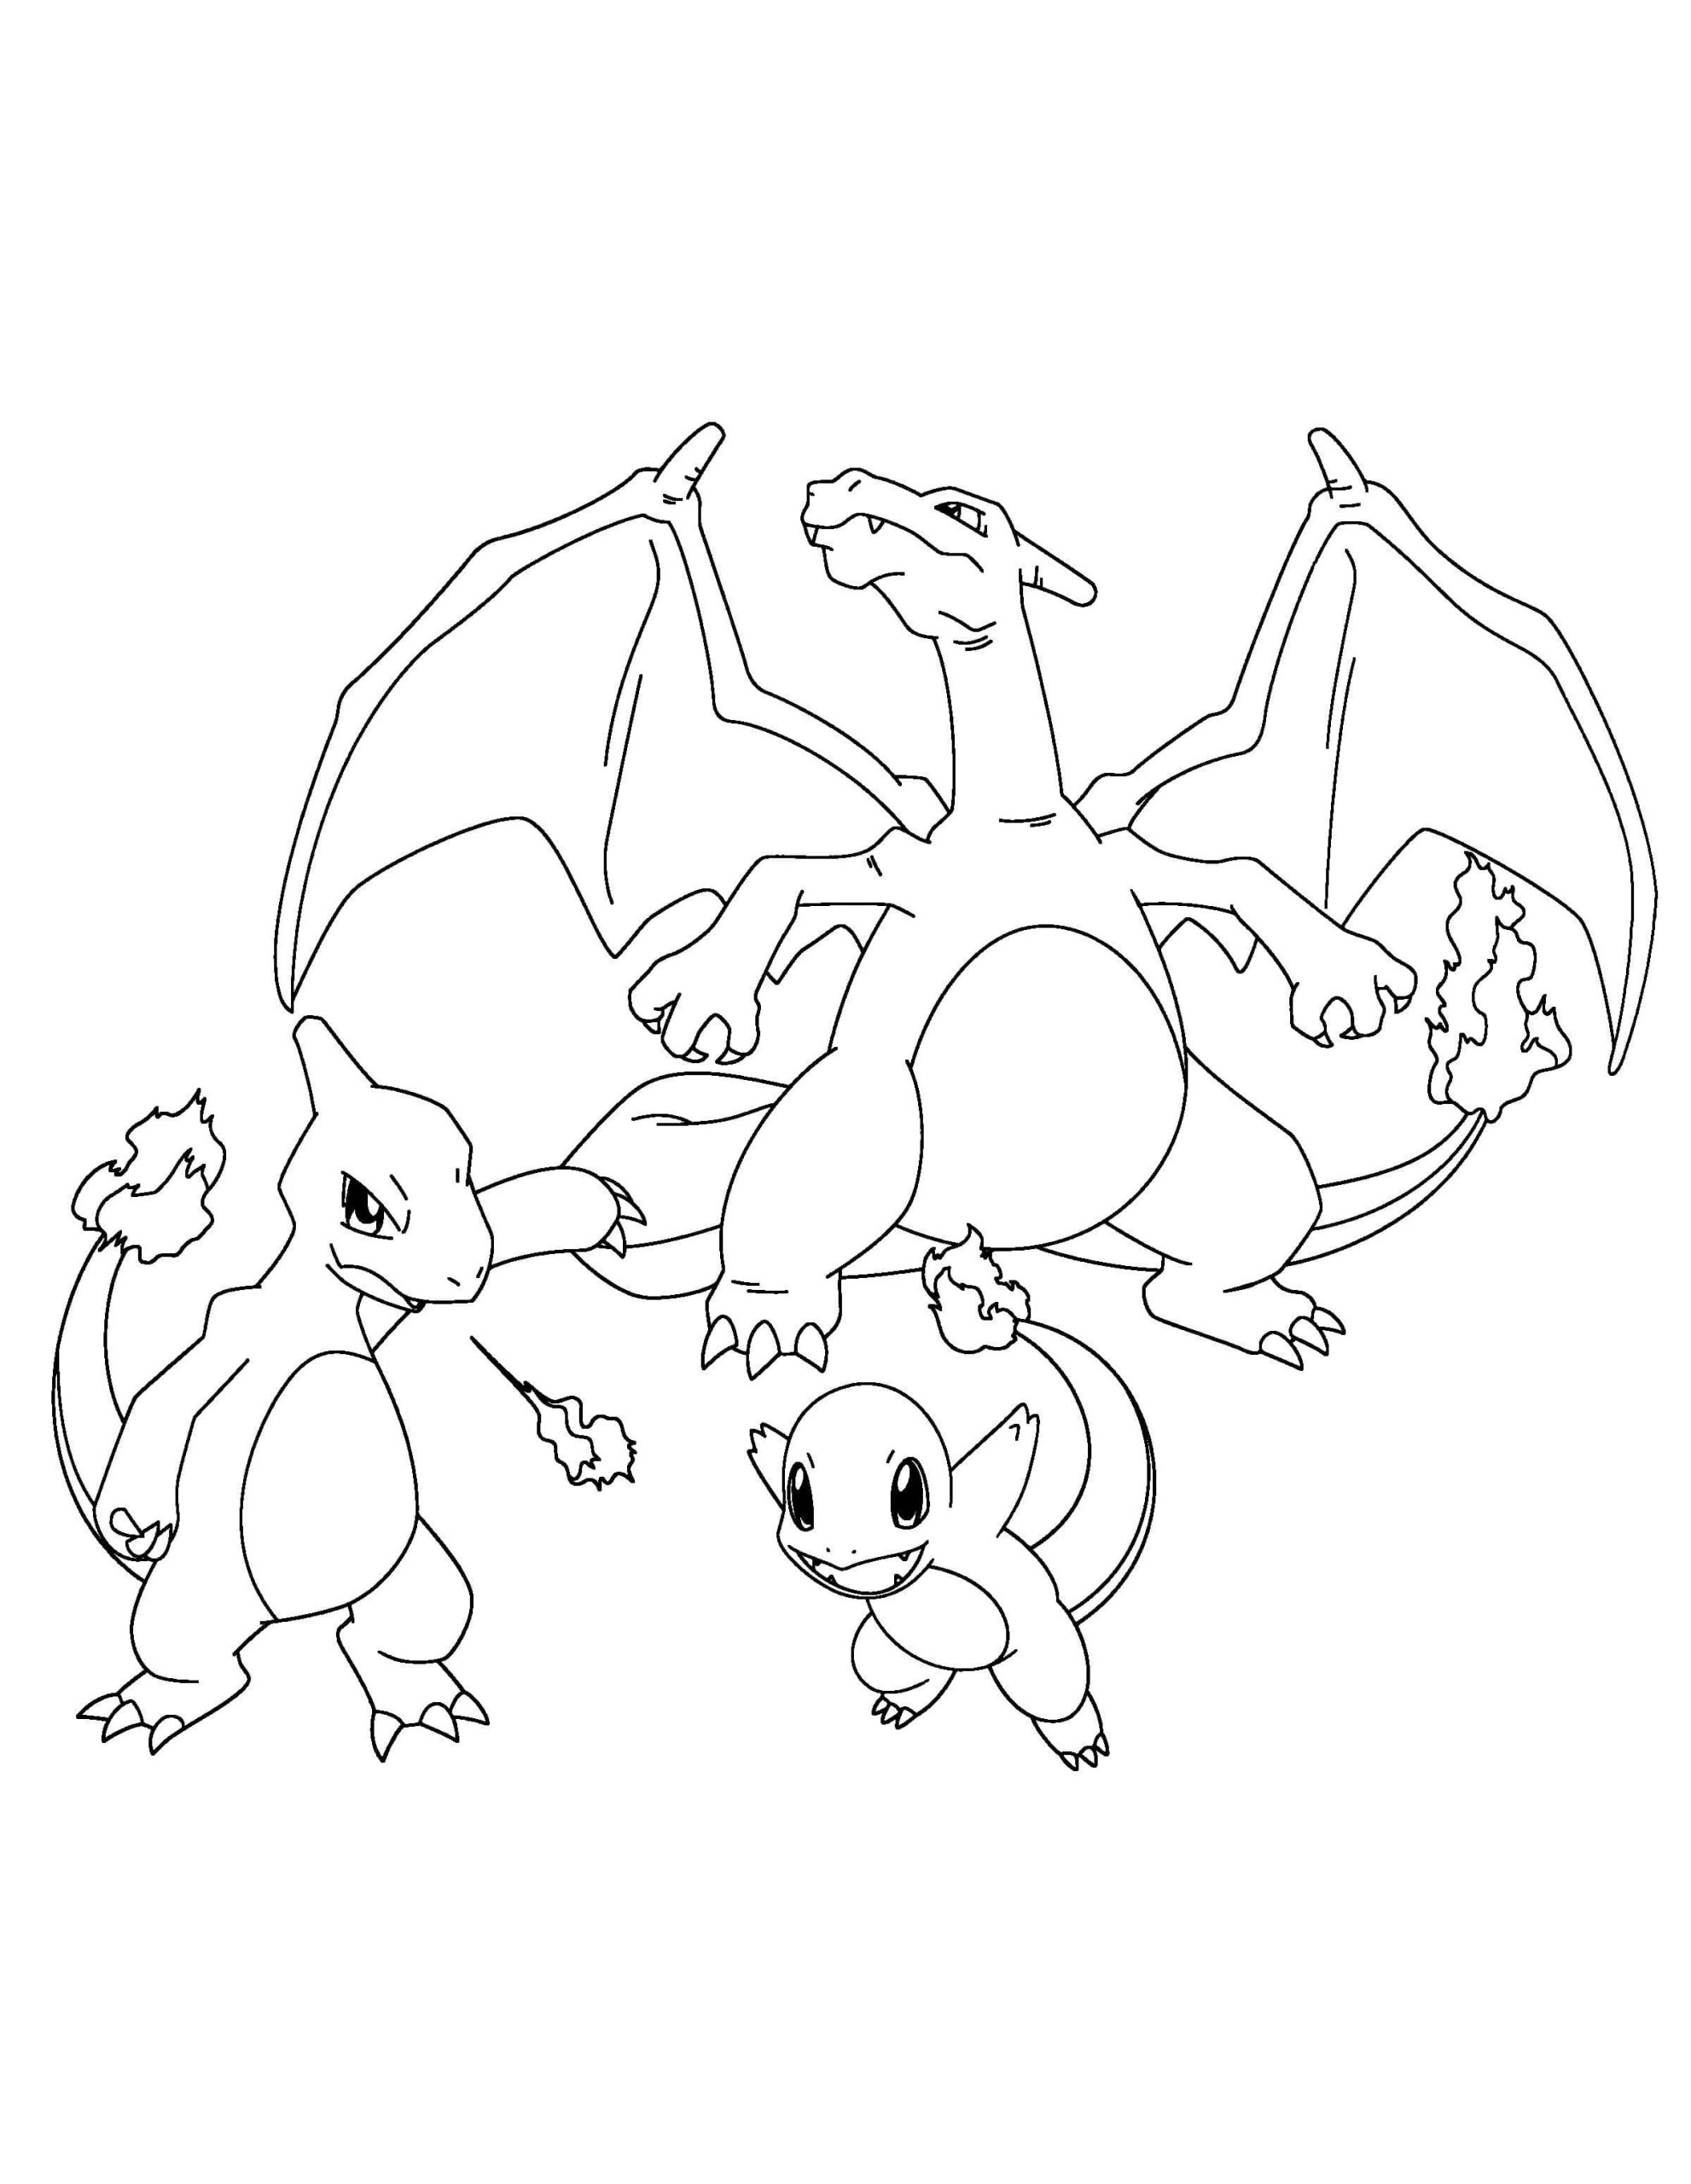 All Stages Of The Evolution Of Pokemon Charmander